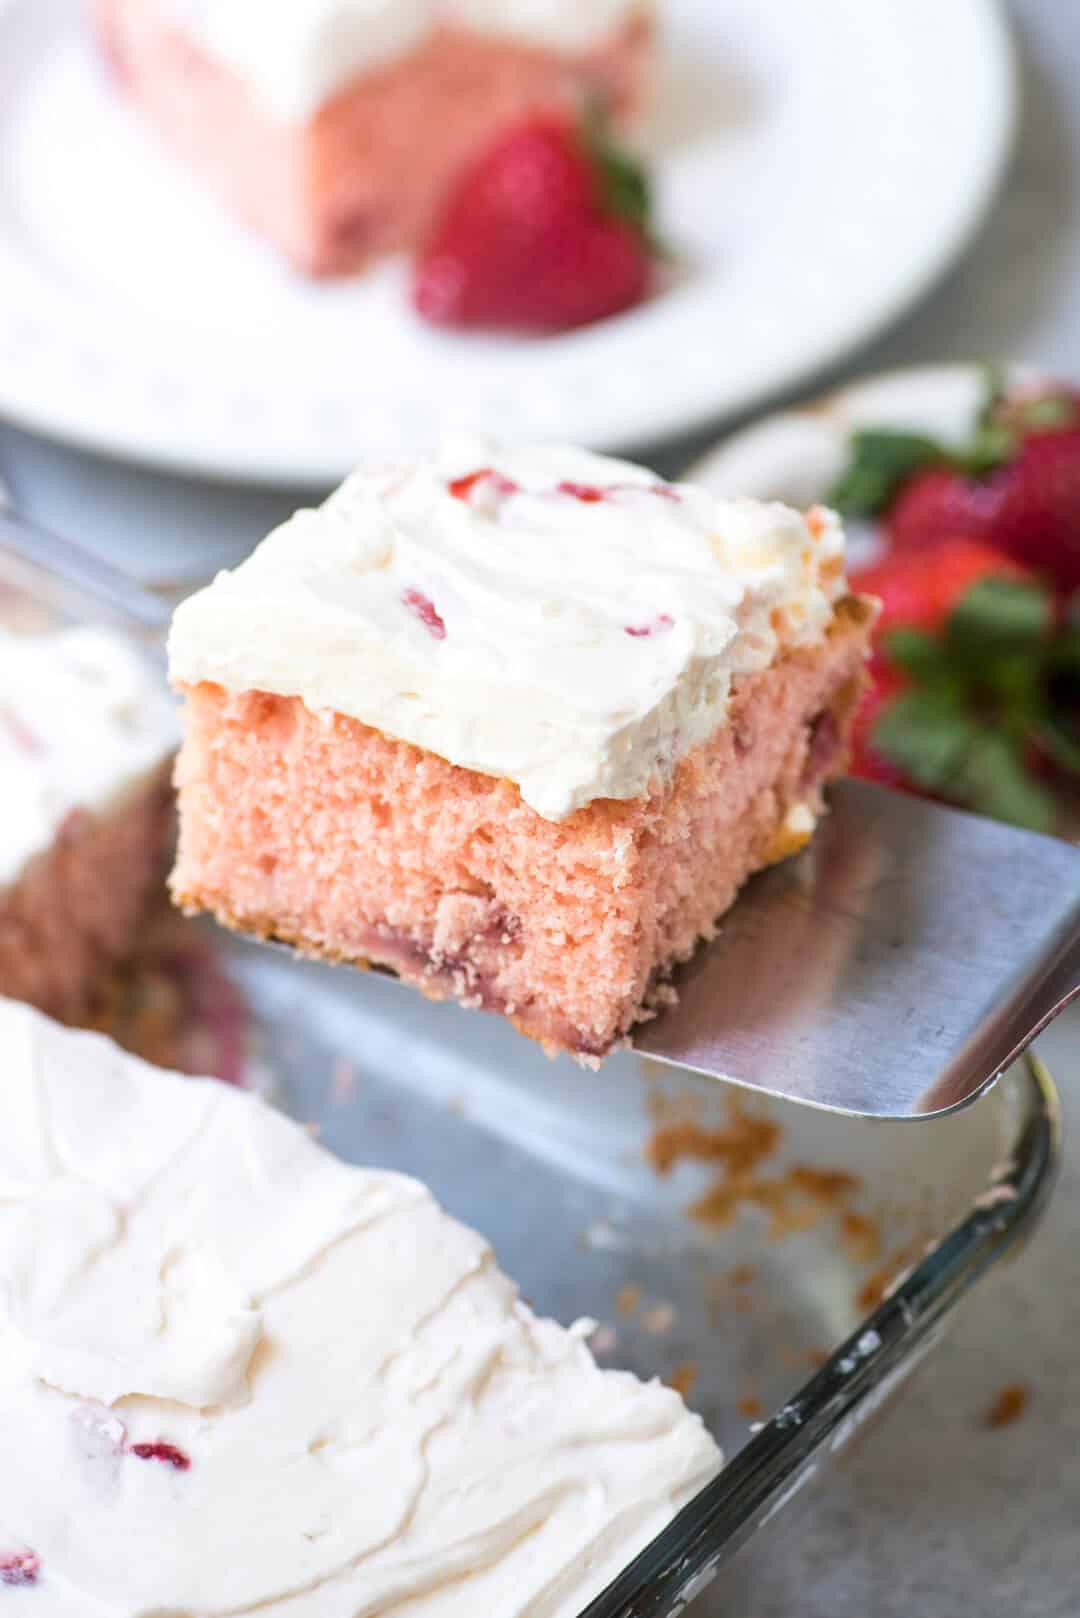 A slice of strawberry cake is lifted with a spatula.